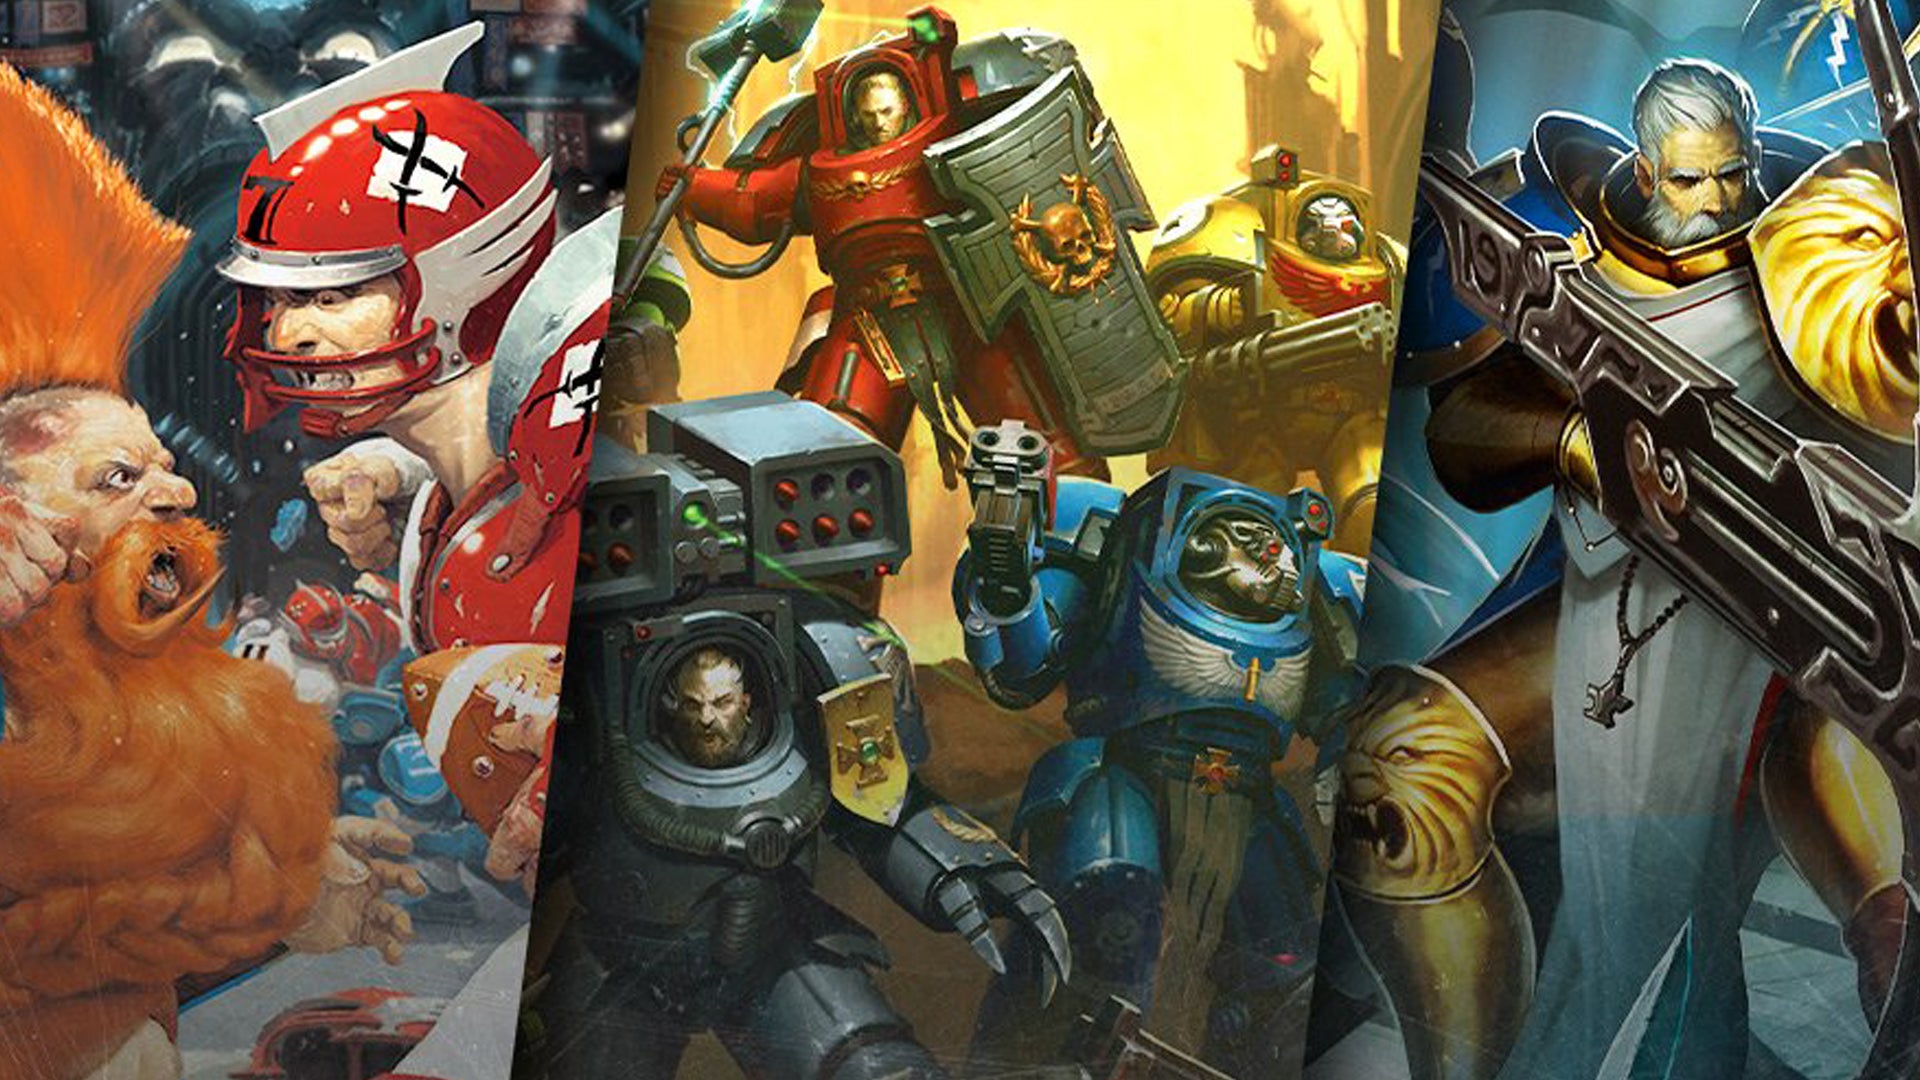 Image for Warhammer 40,000, Age of Sigmar and Blood Bowl are all getting new board games